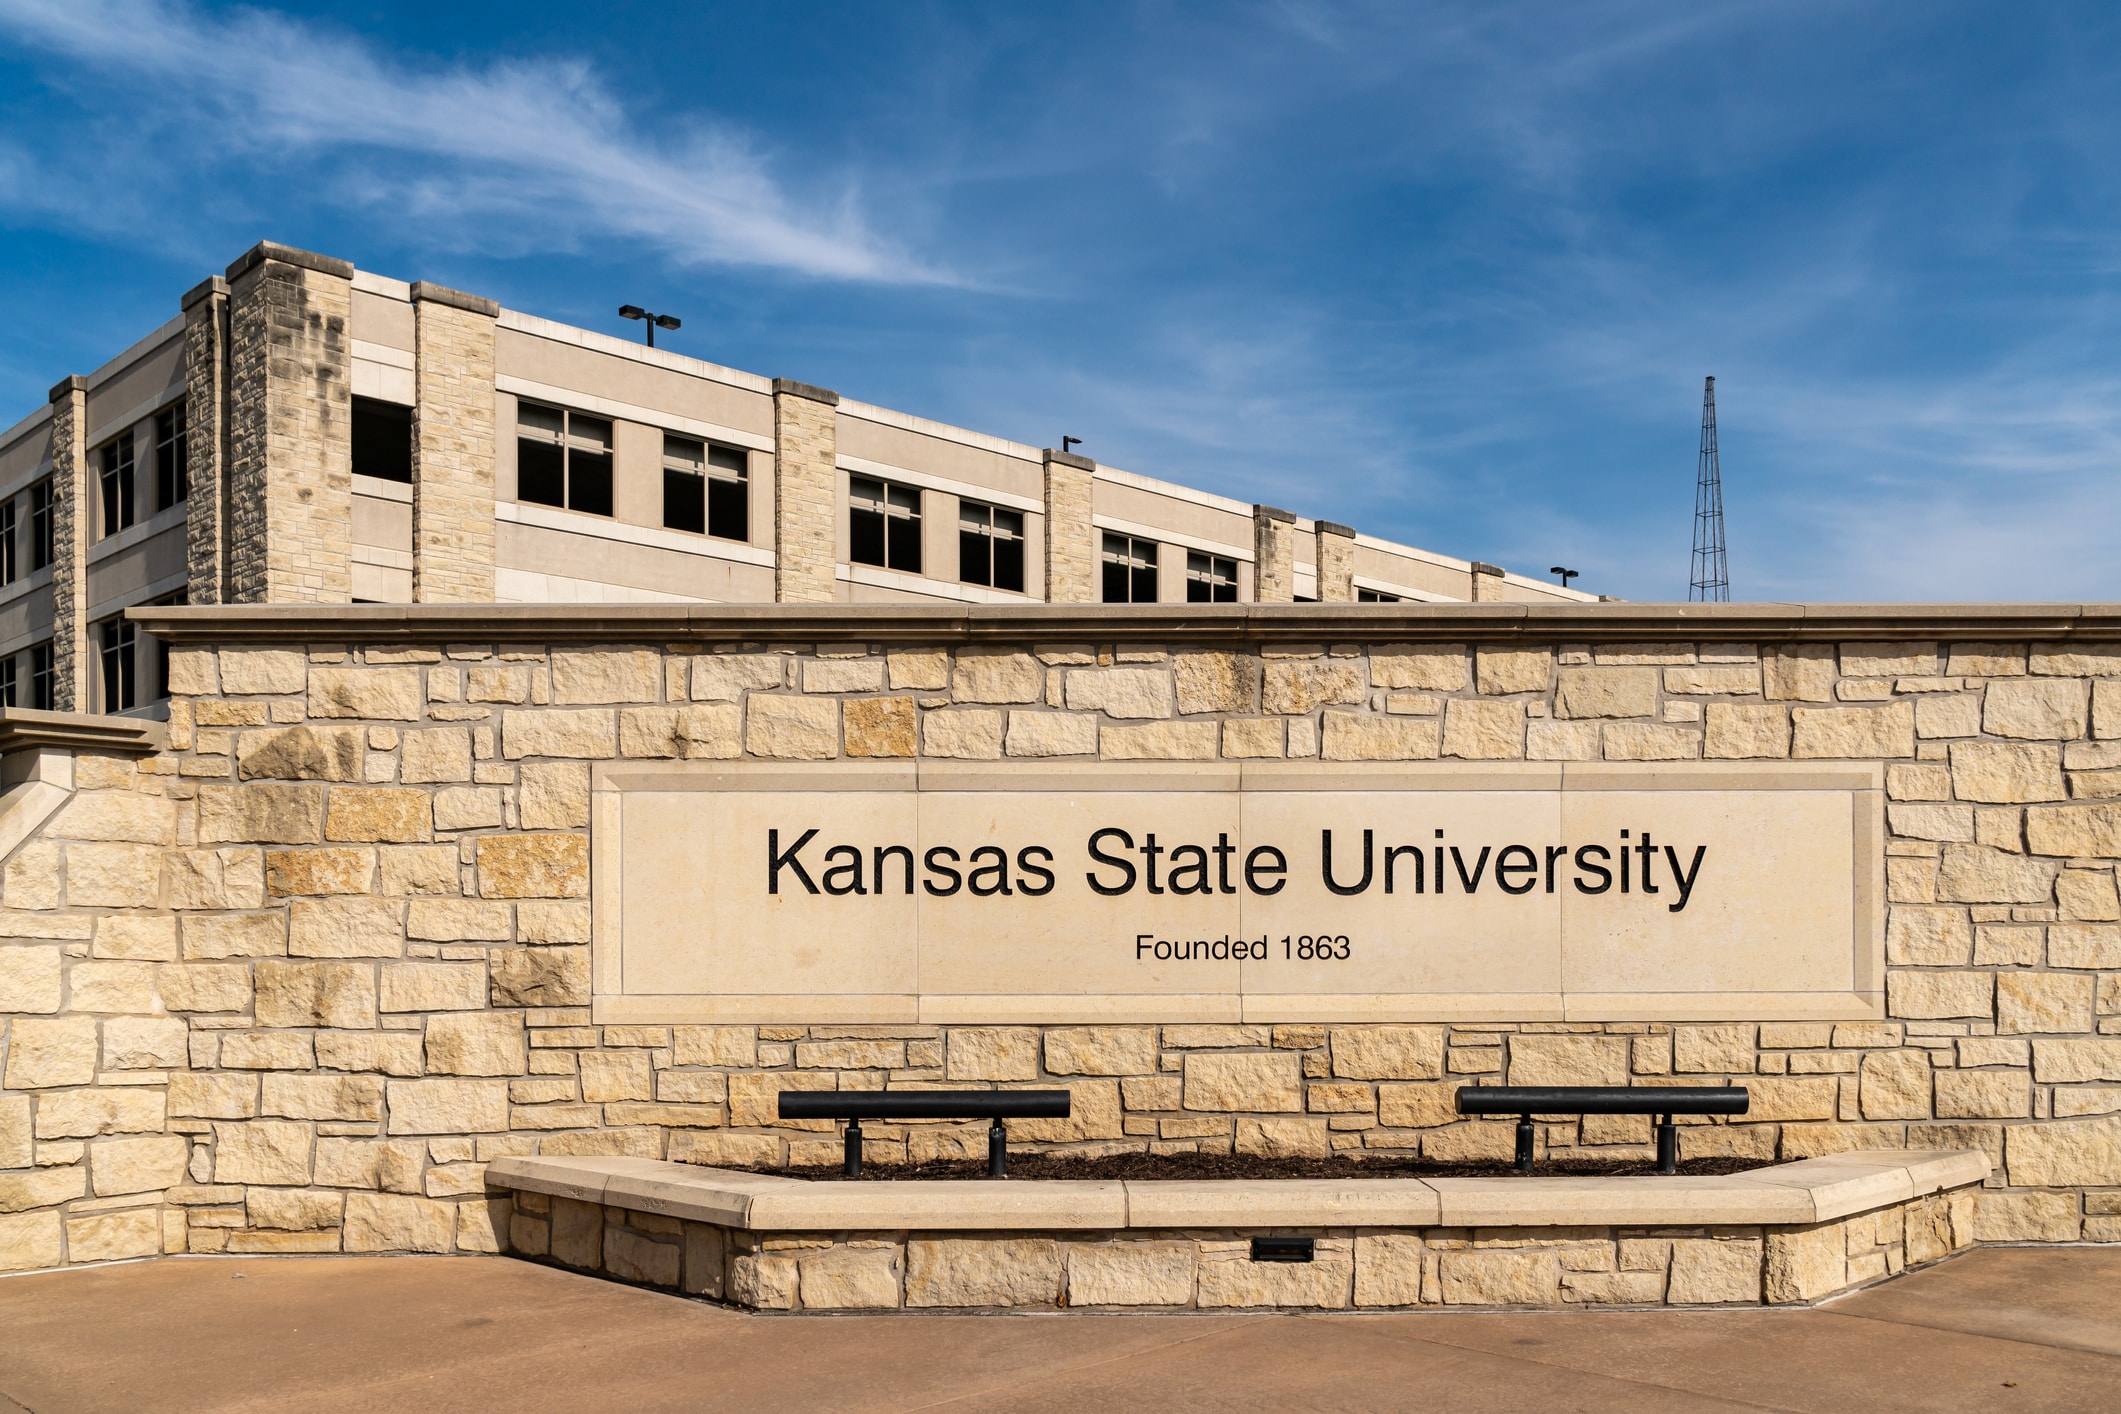 Entrance wall and flags to the campus of Kansas State University.